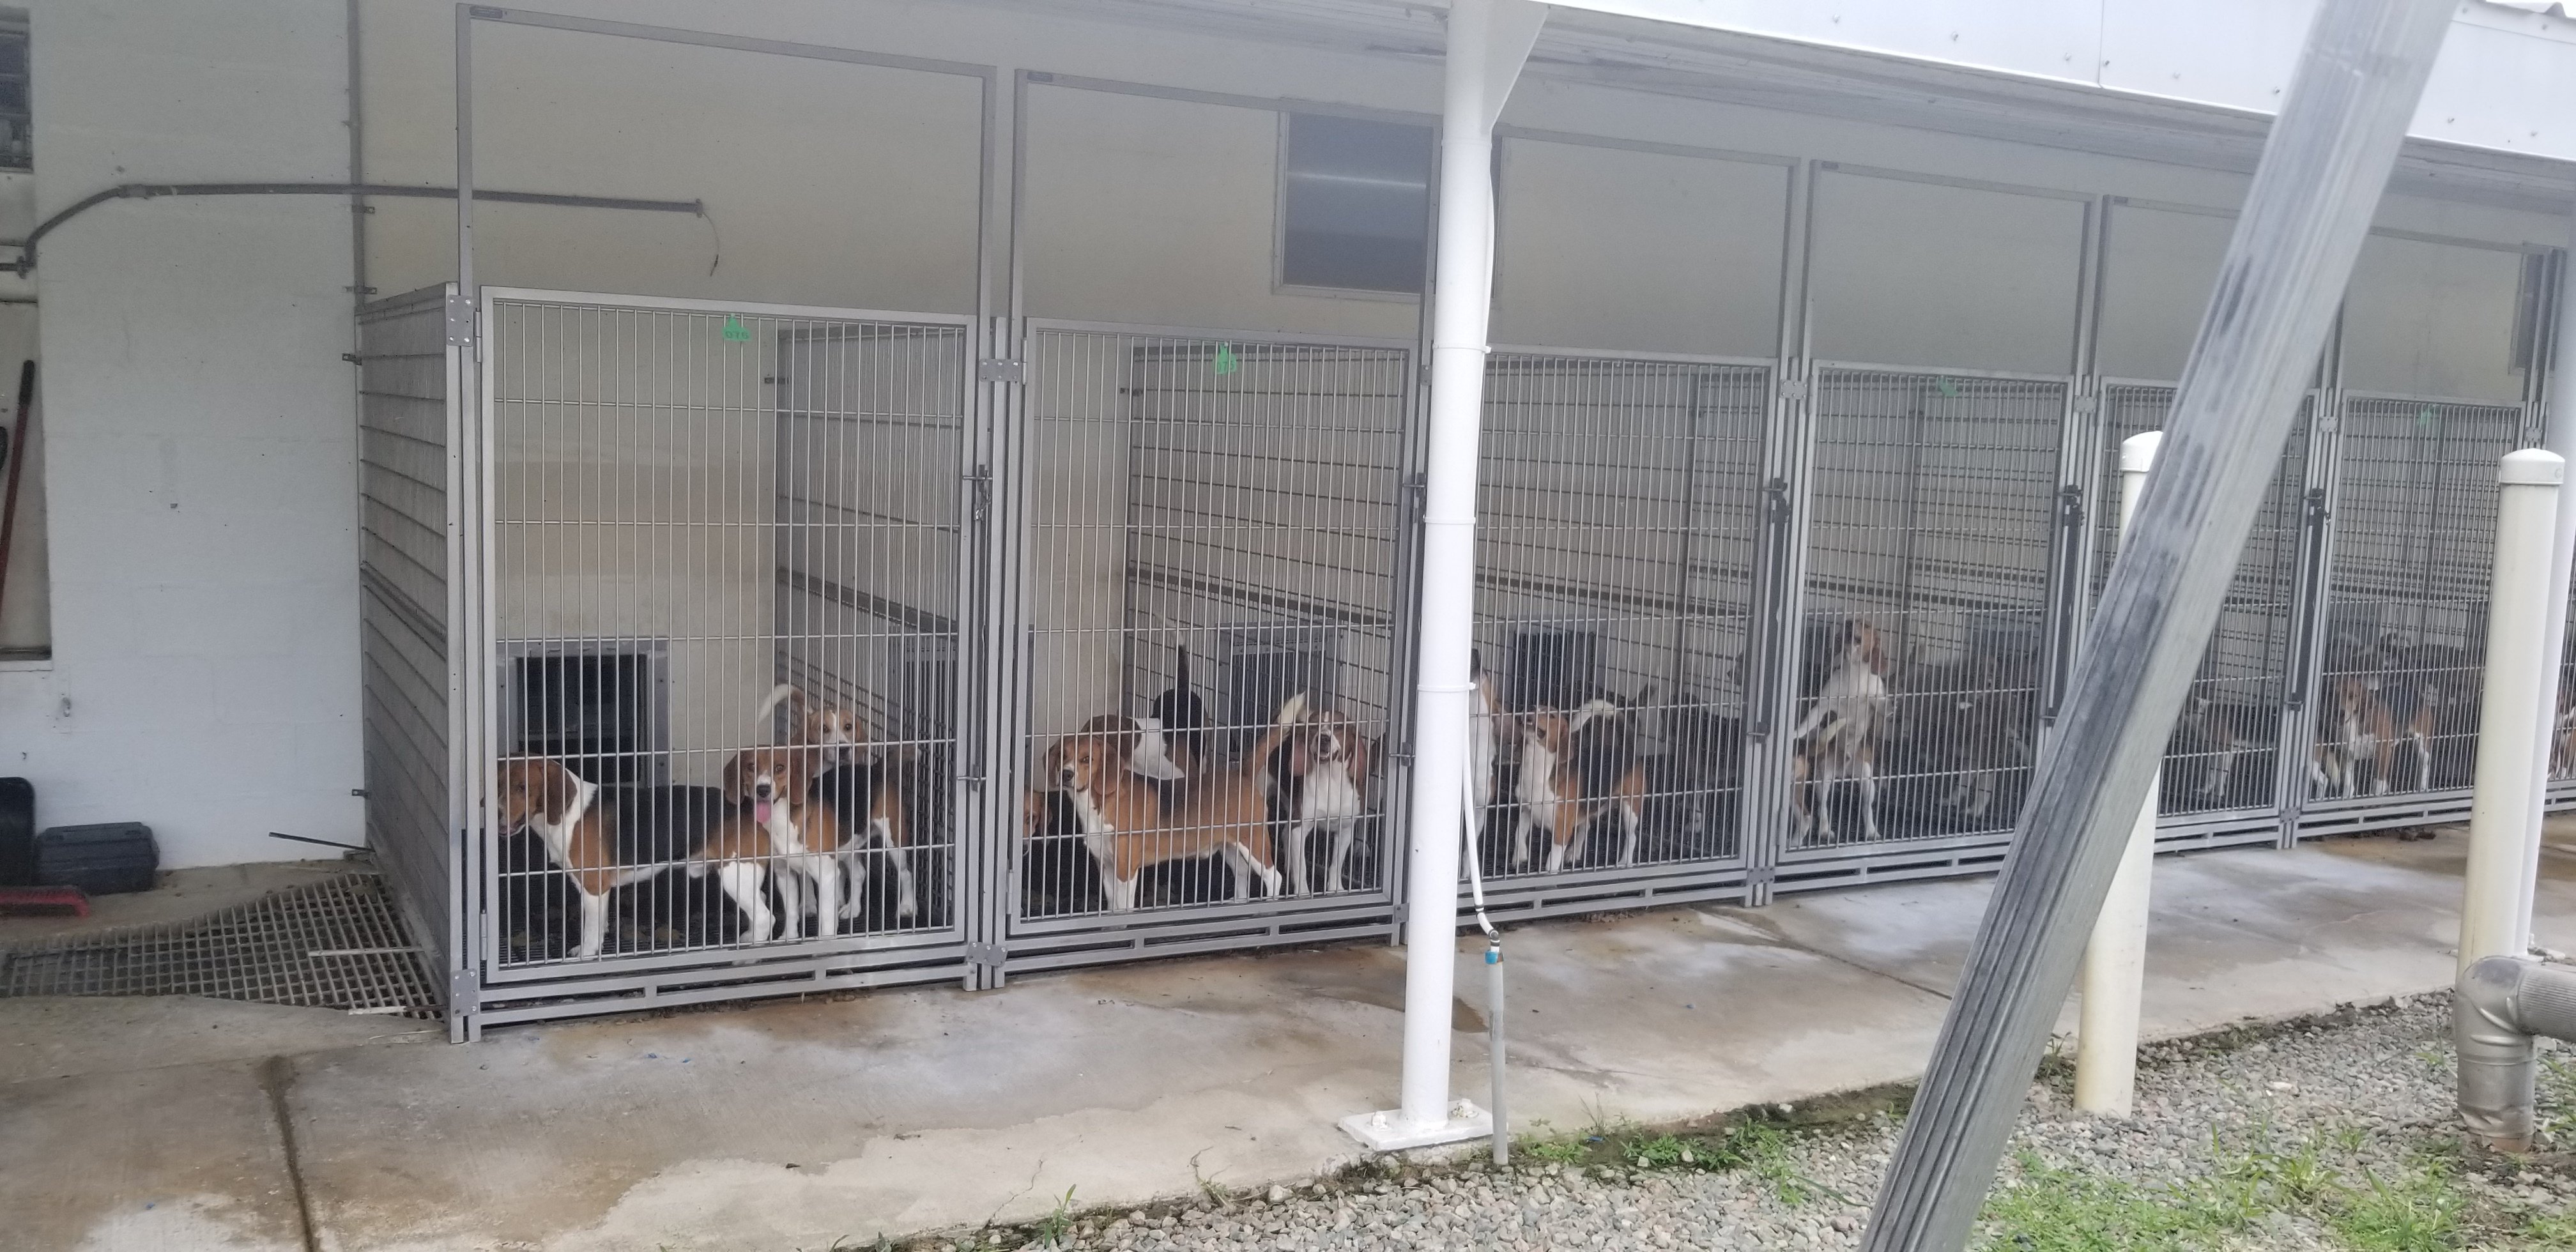 dogs warehoused in crowded conditions at facility that was owned and operated by envigo